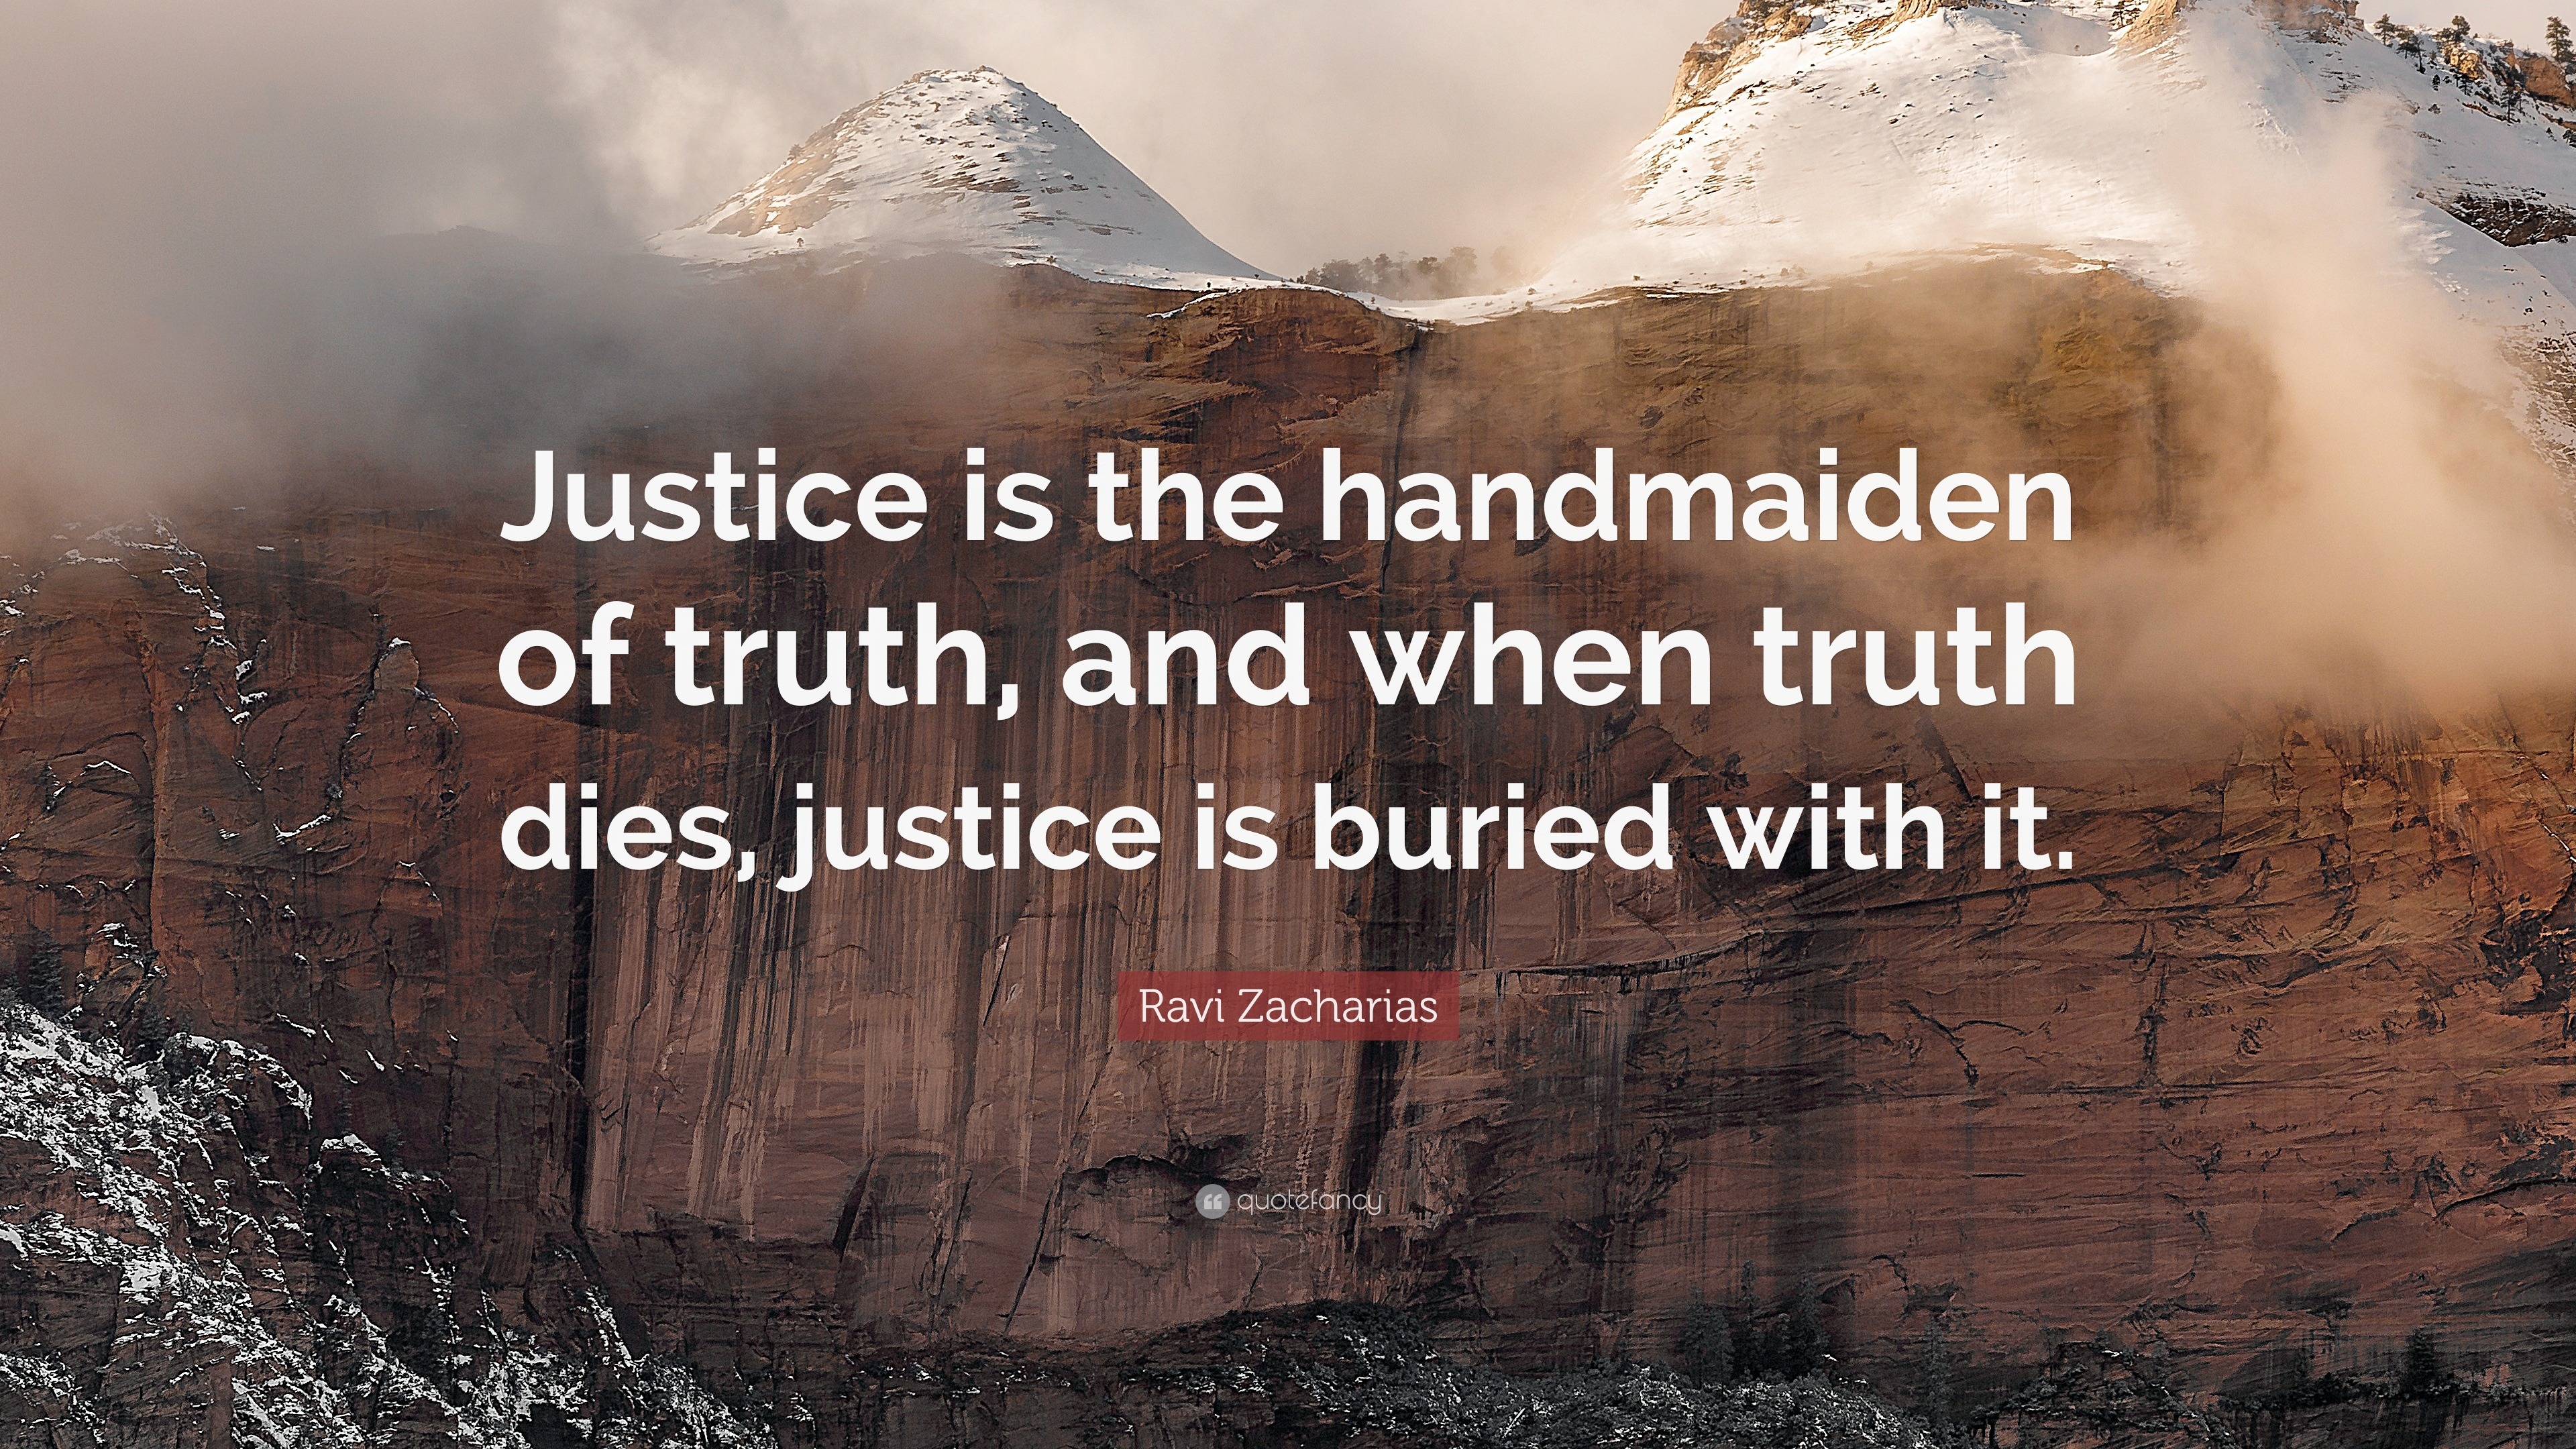 Ravi Zacharias Quote “Justice is the handmaiden of truth